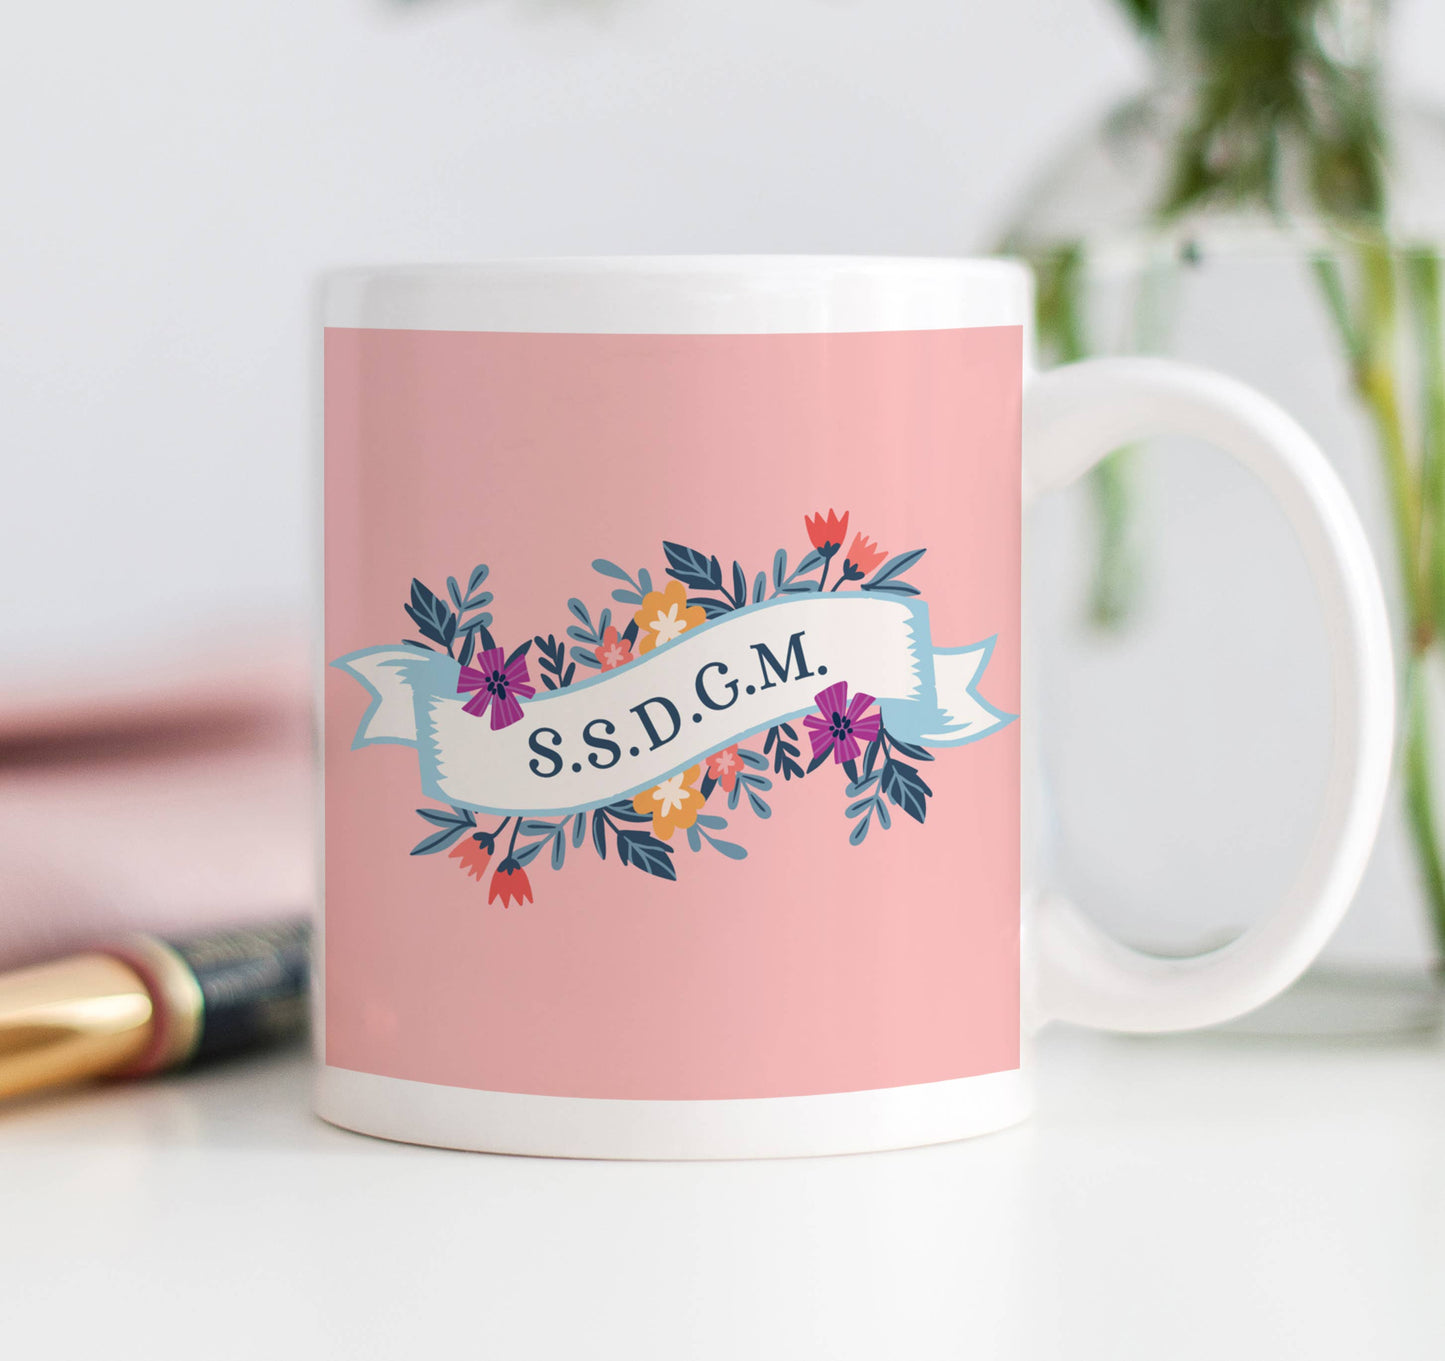 S.S.D.G.M. Mug, Stay Sexy Don't Get Murdered Coffee Cup